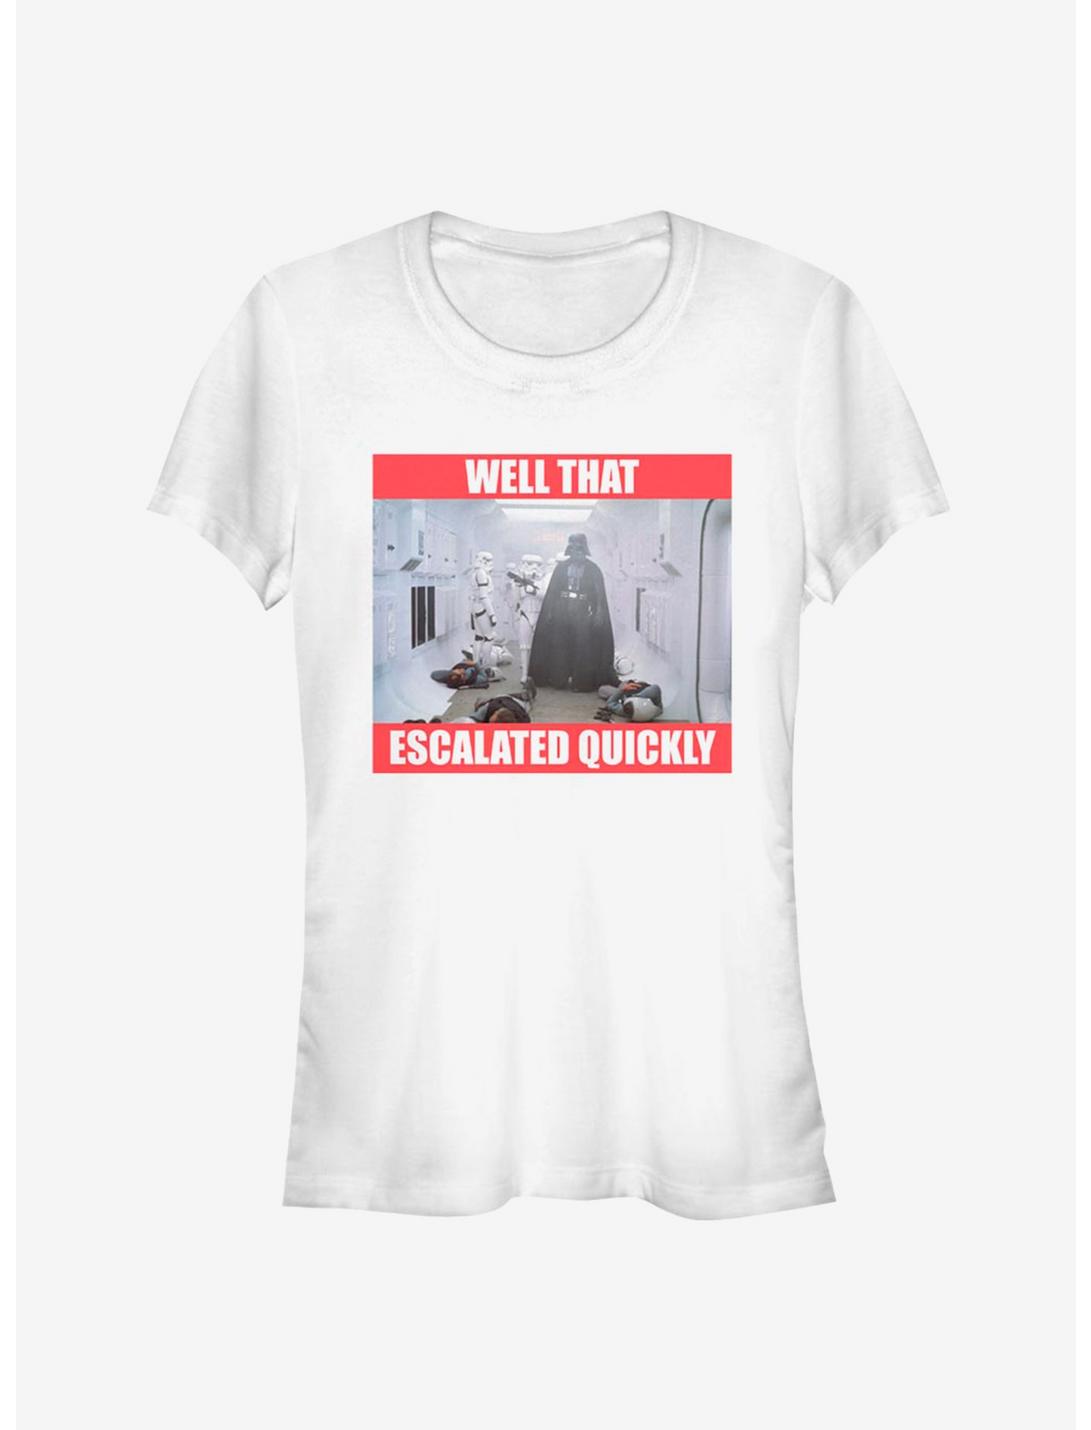 Star Wars Escalated Quickly Girls T-Shirt, WHITE, hi-res